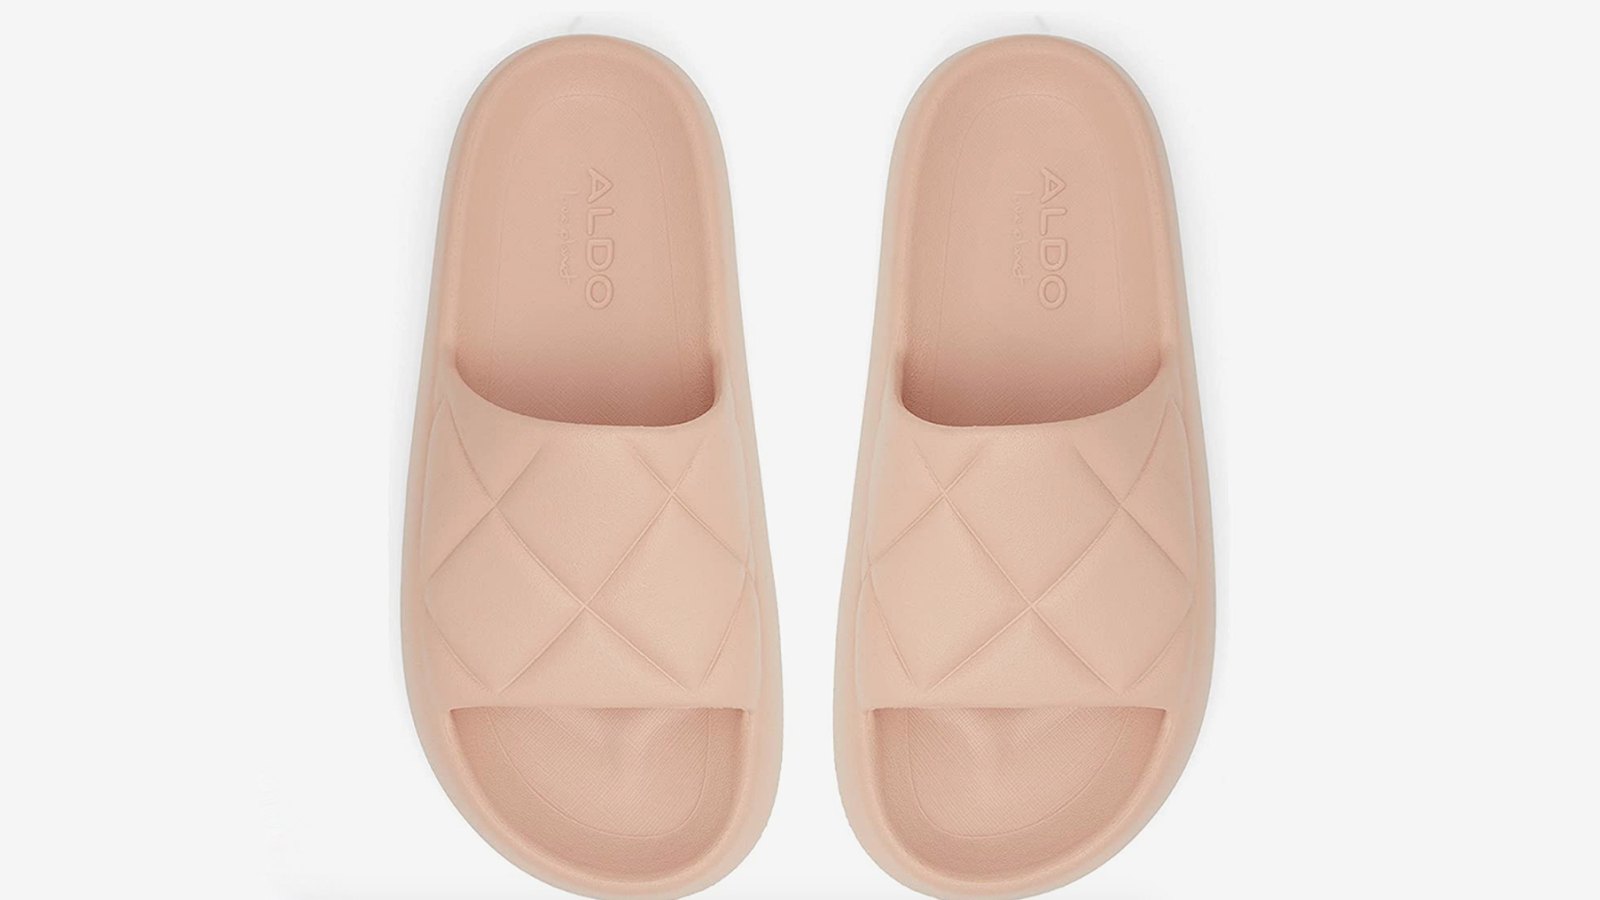 ALDO Slides Are Stylish, Comfy and Sale at Zappos